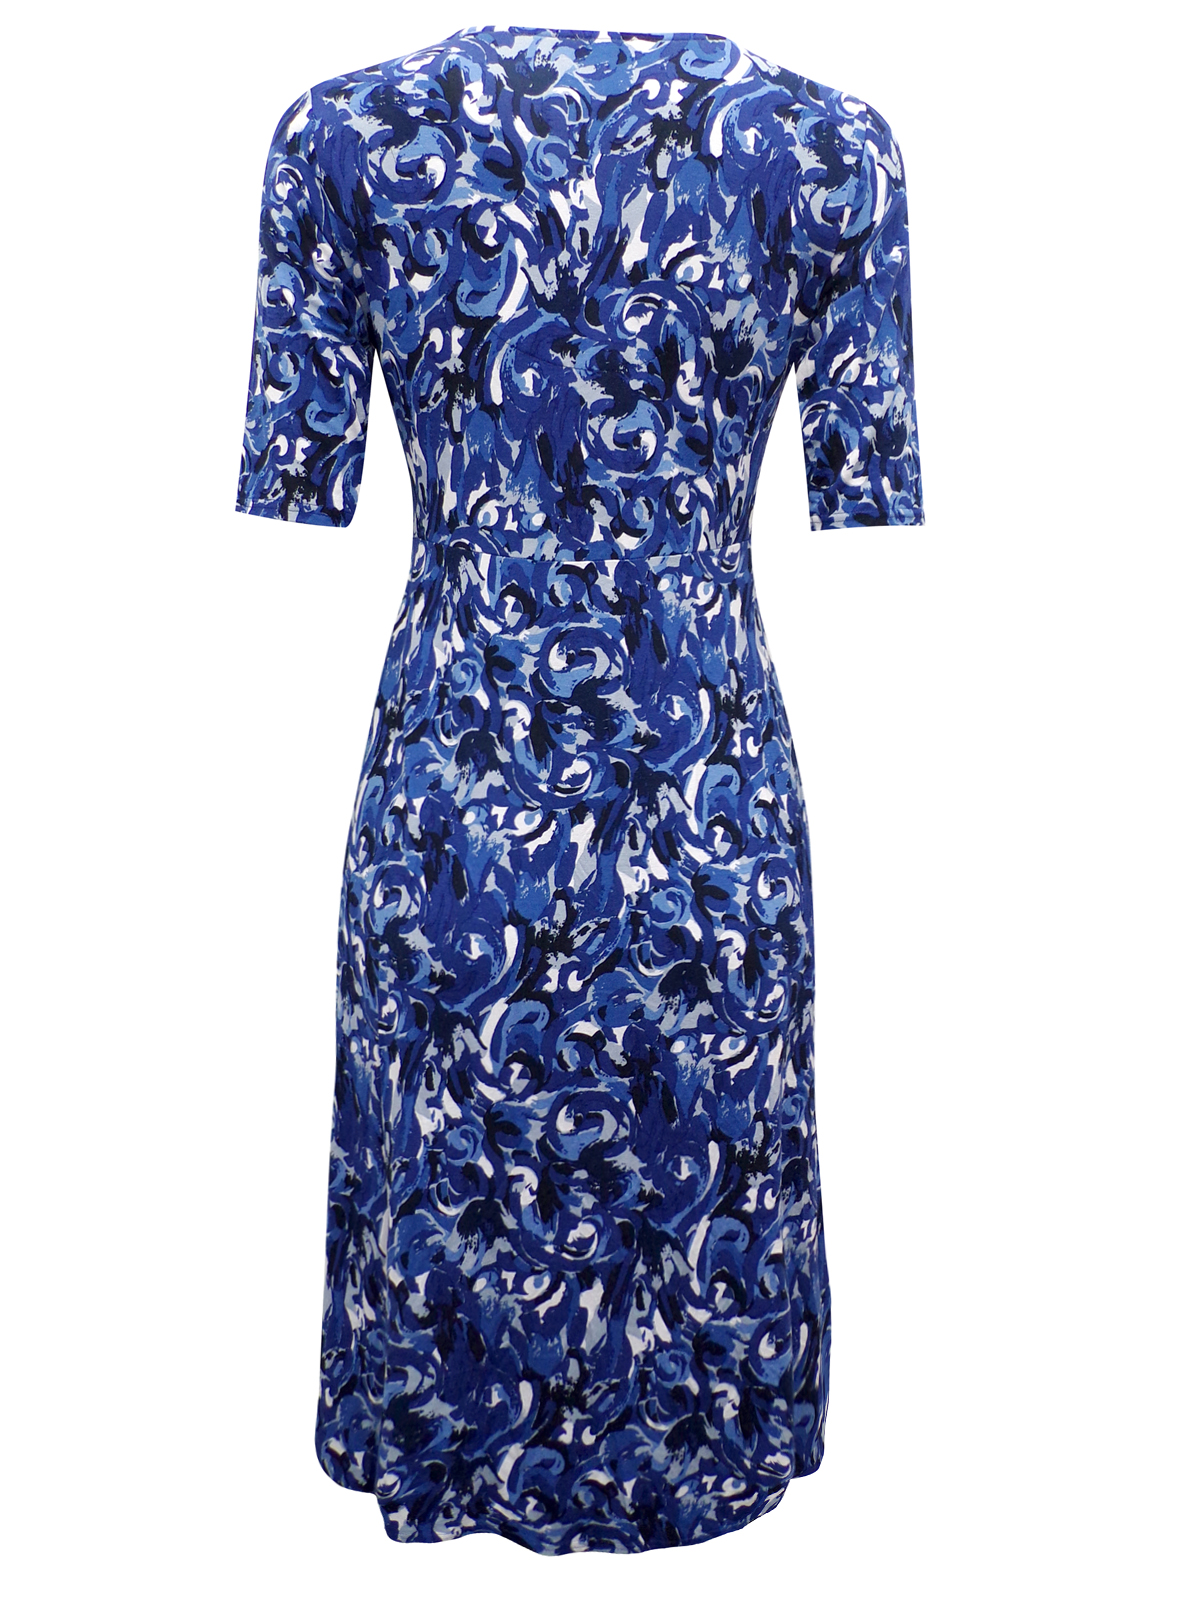 East - - East BLUE Twist Front Printed Jersey Dress - Size 8